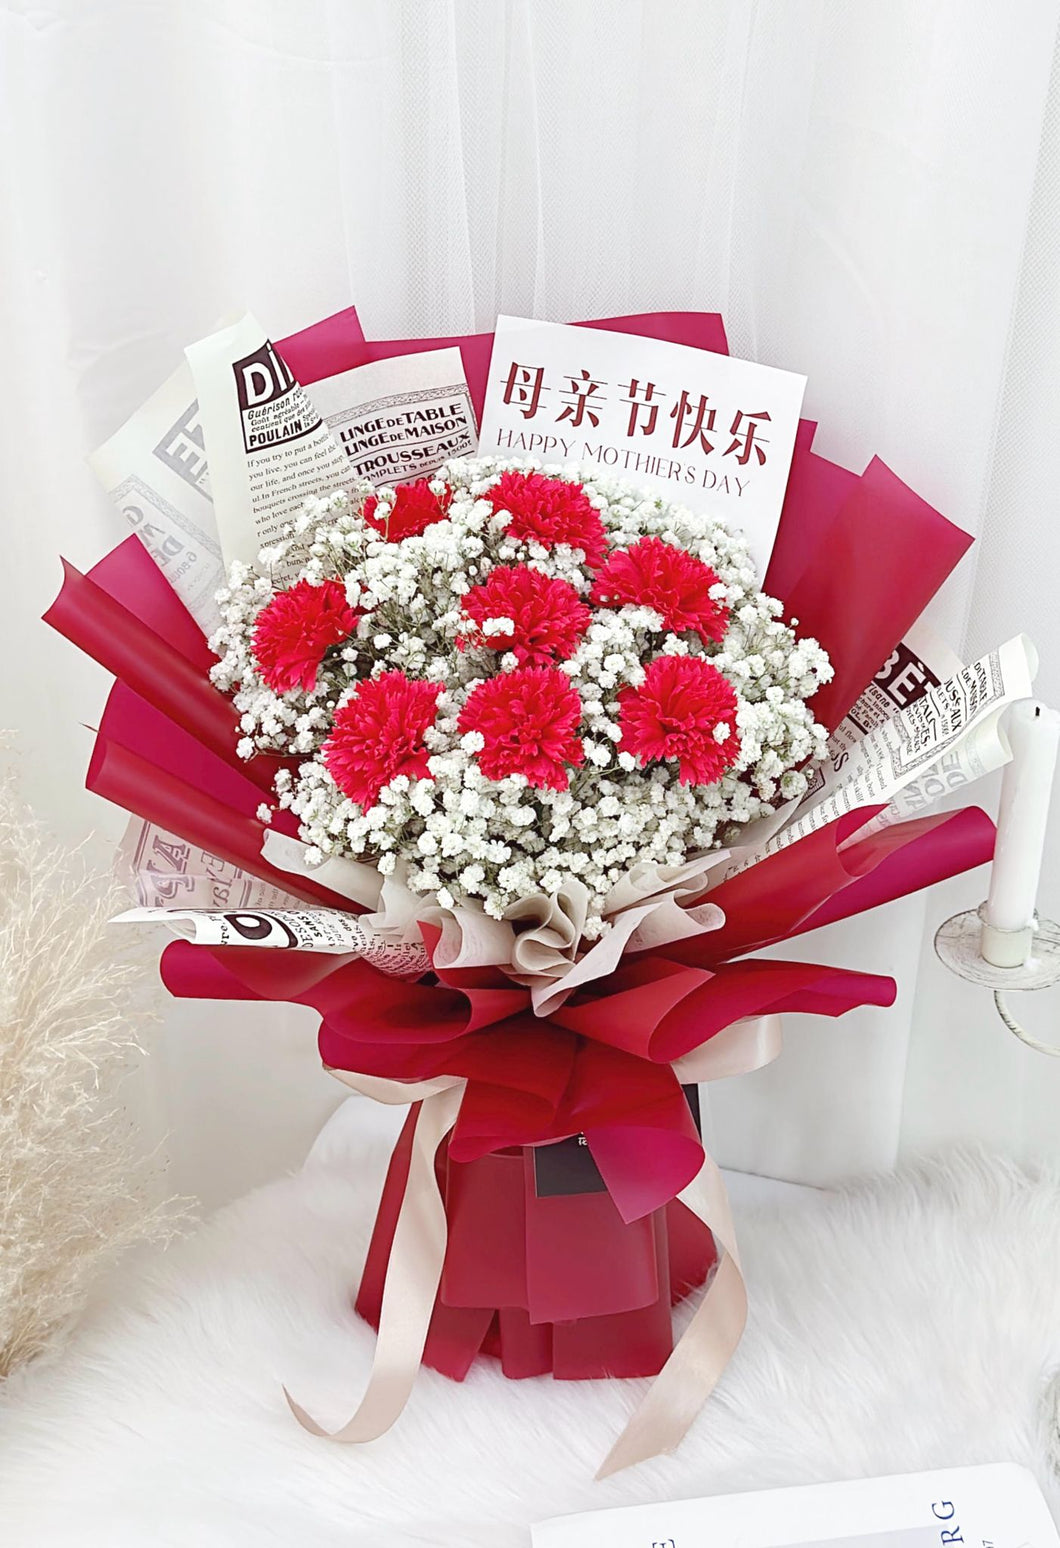 Mothers' Day Soap Carnations with Baby's Breath Bouquet 母亲节香皂康乃馨满天星花束（香皂花）